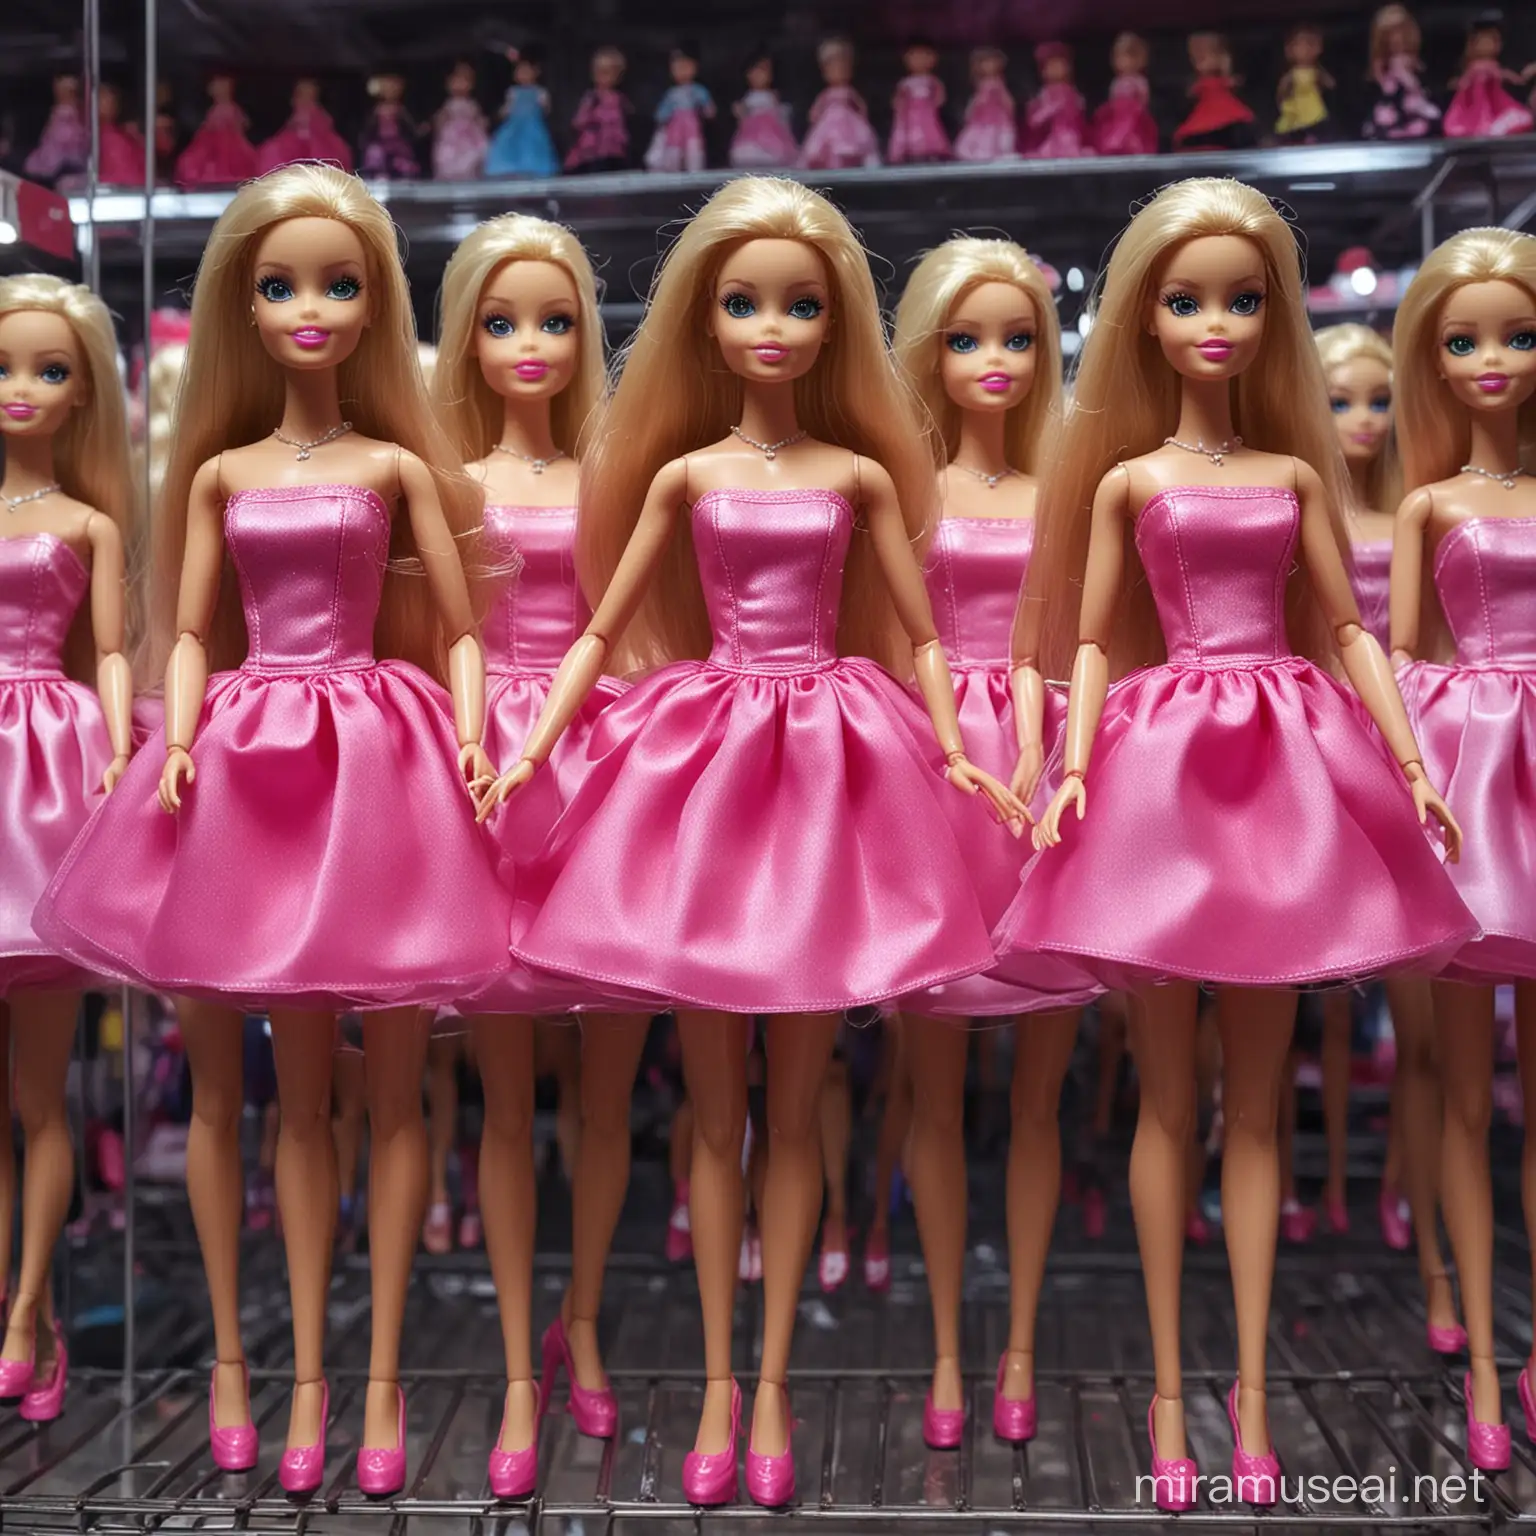 Spooky Haunted Barbie Dolls Displayed in Nighttime Toy Store